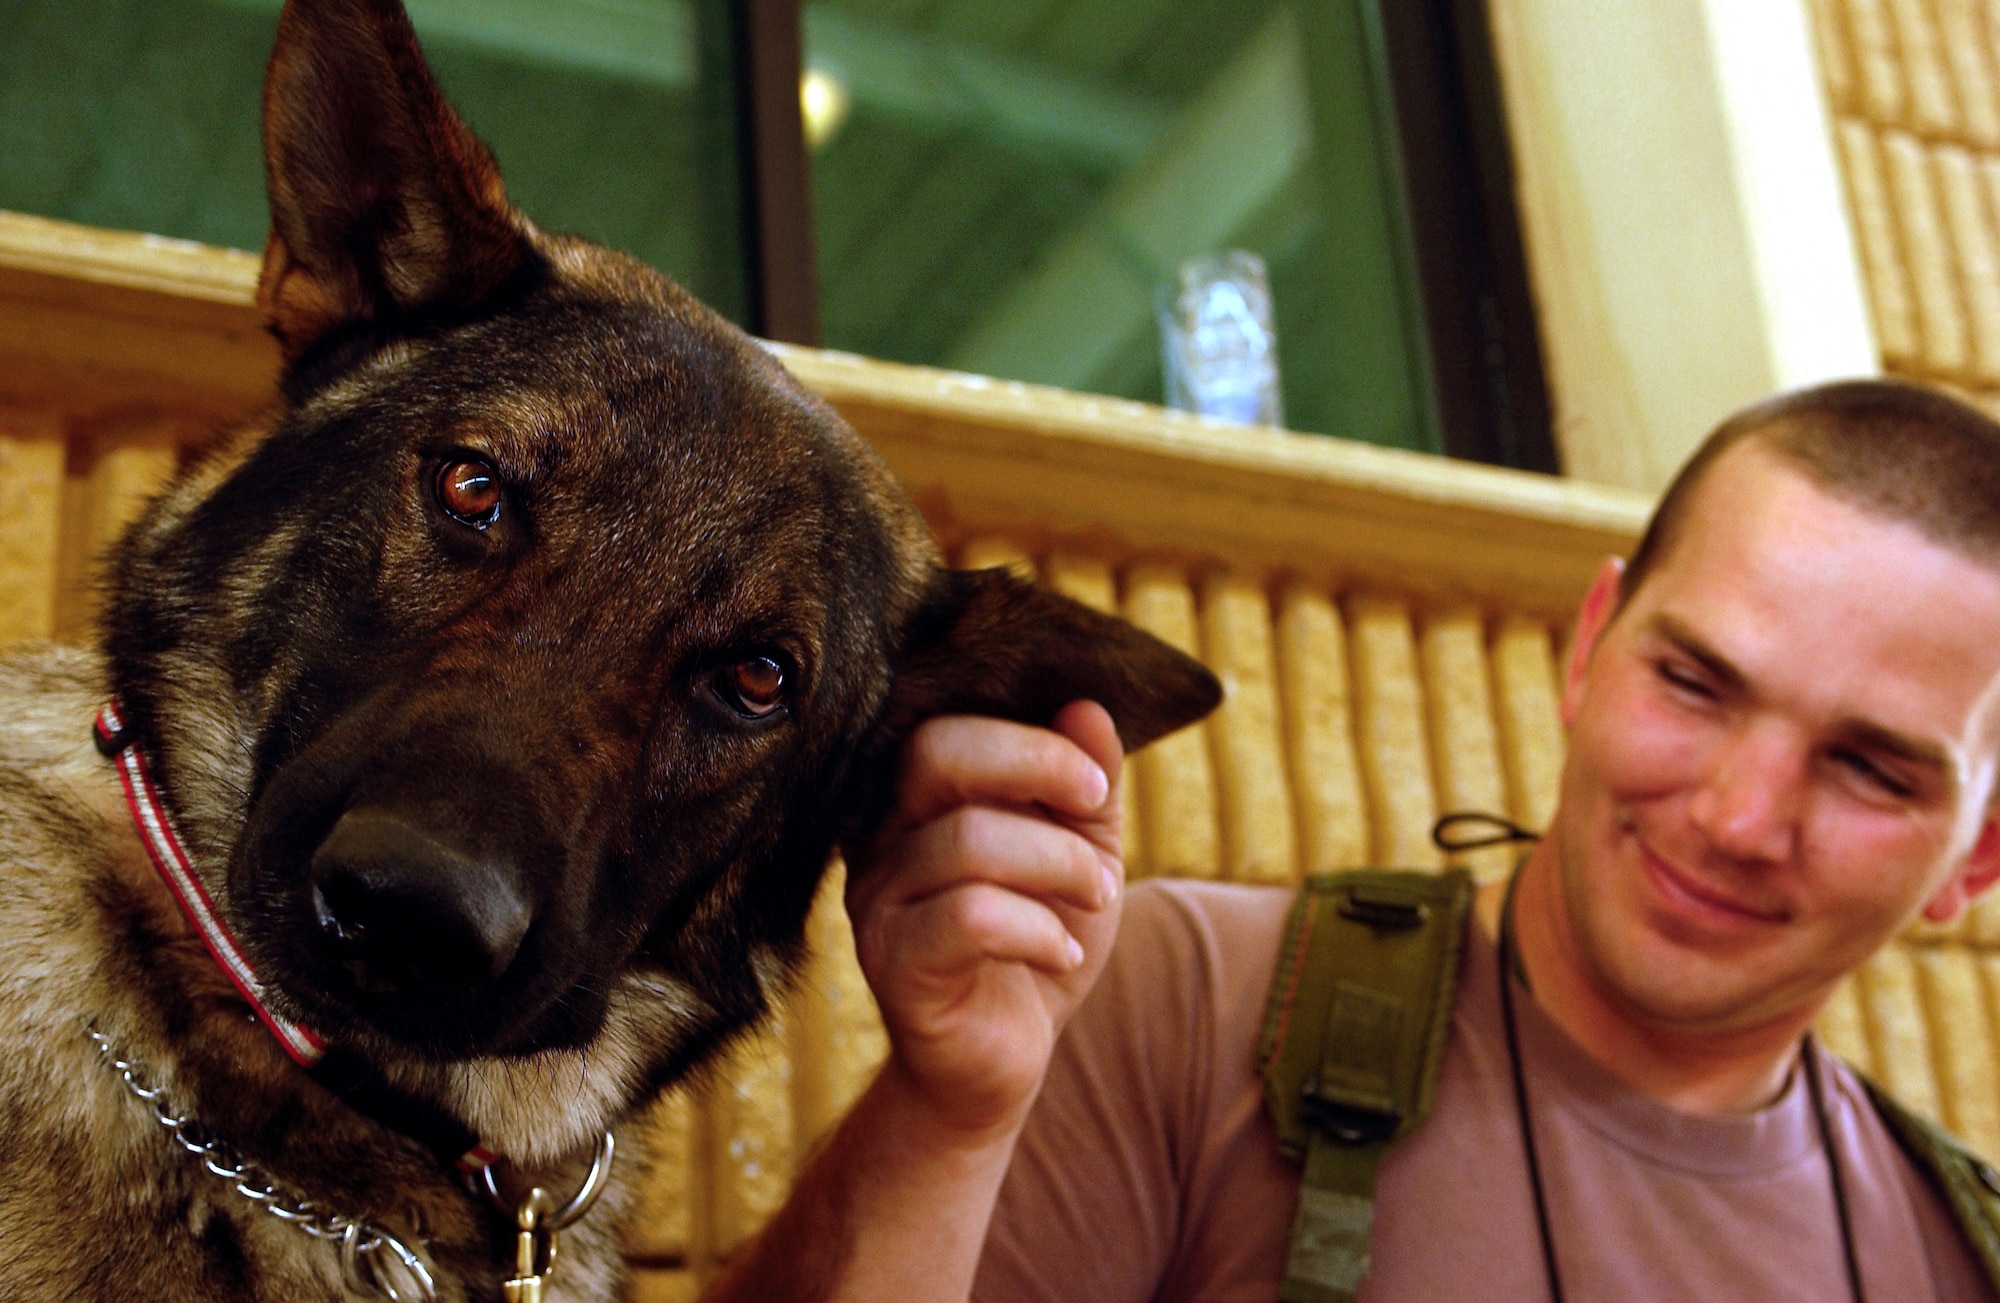 OPERATION IRAQI FREEDOM -- Staff Sgt. Chad Reemtsna, a military working dog handler and Hero, his military working dog both deployed from the 18th Security Forces Squadron, Kadena Air Base, Japan to the 363rd Expeditionary Security Forces Squadron, spend quality time together while waiting for more vehicles to search during a mobile security patrol on April 8. Before military working dogs can be deployed they must pass an explosive ordinance test. The 363rd ESFS search crews work around the clock checking coalition forces, third country nationals, and contractor vehicles for bombs and other explosive devices in support of Operation Iraqi Freedom at a forward deployed location in Southwest Asia.   (U.S. Air Force Photo by Staff Sgt. Matthew Hannen) 
